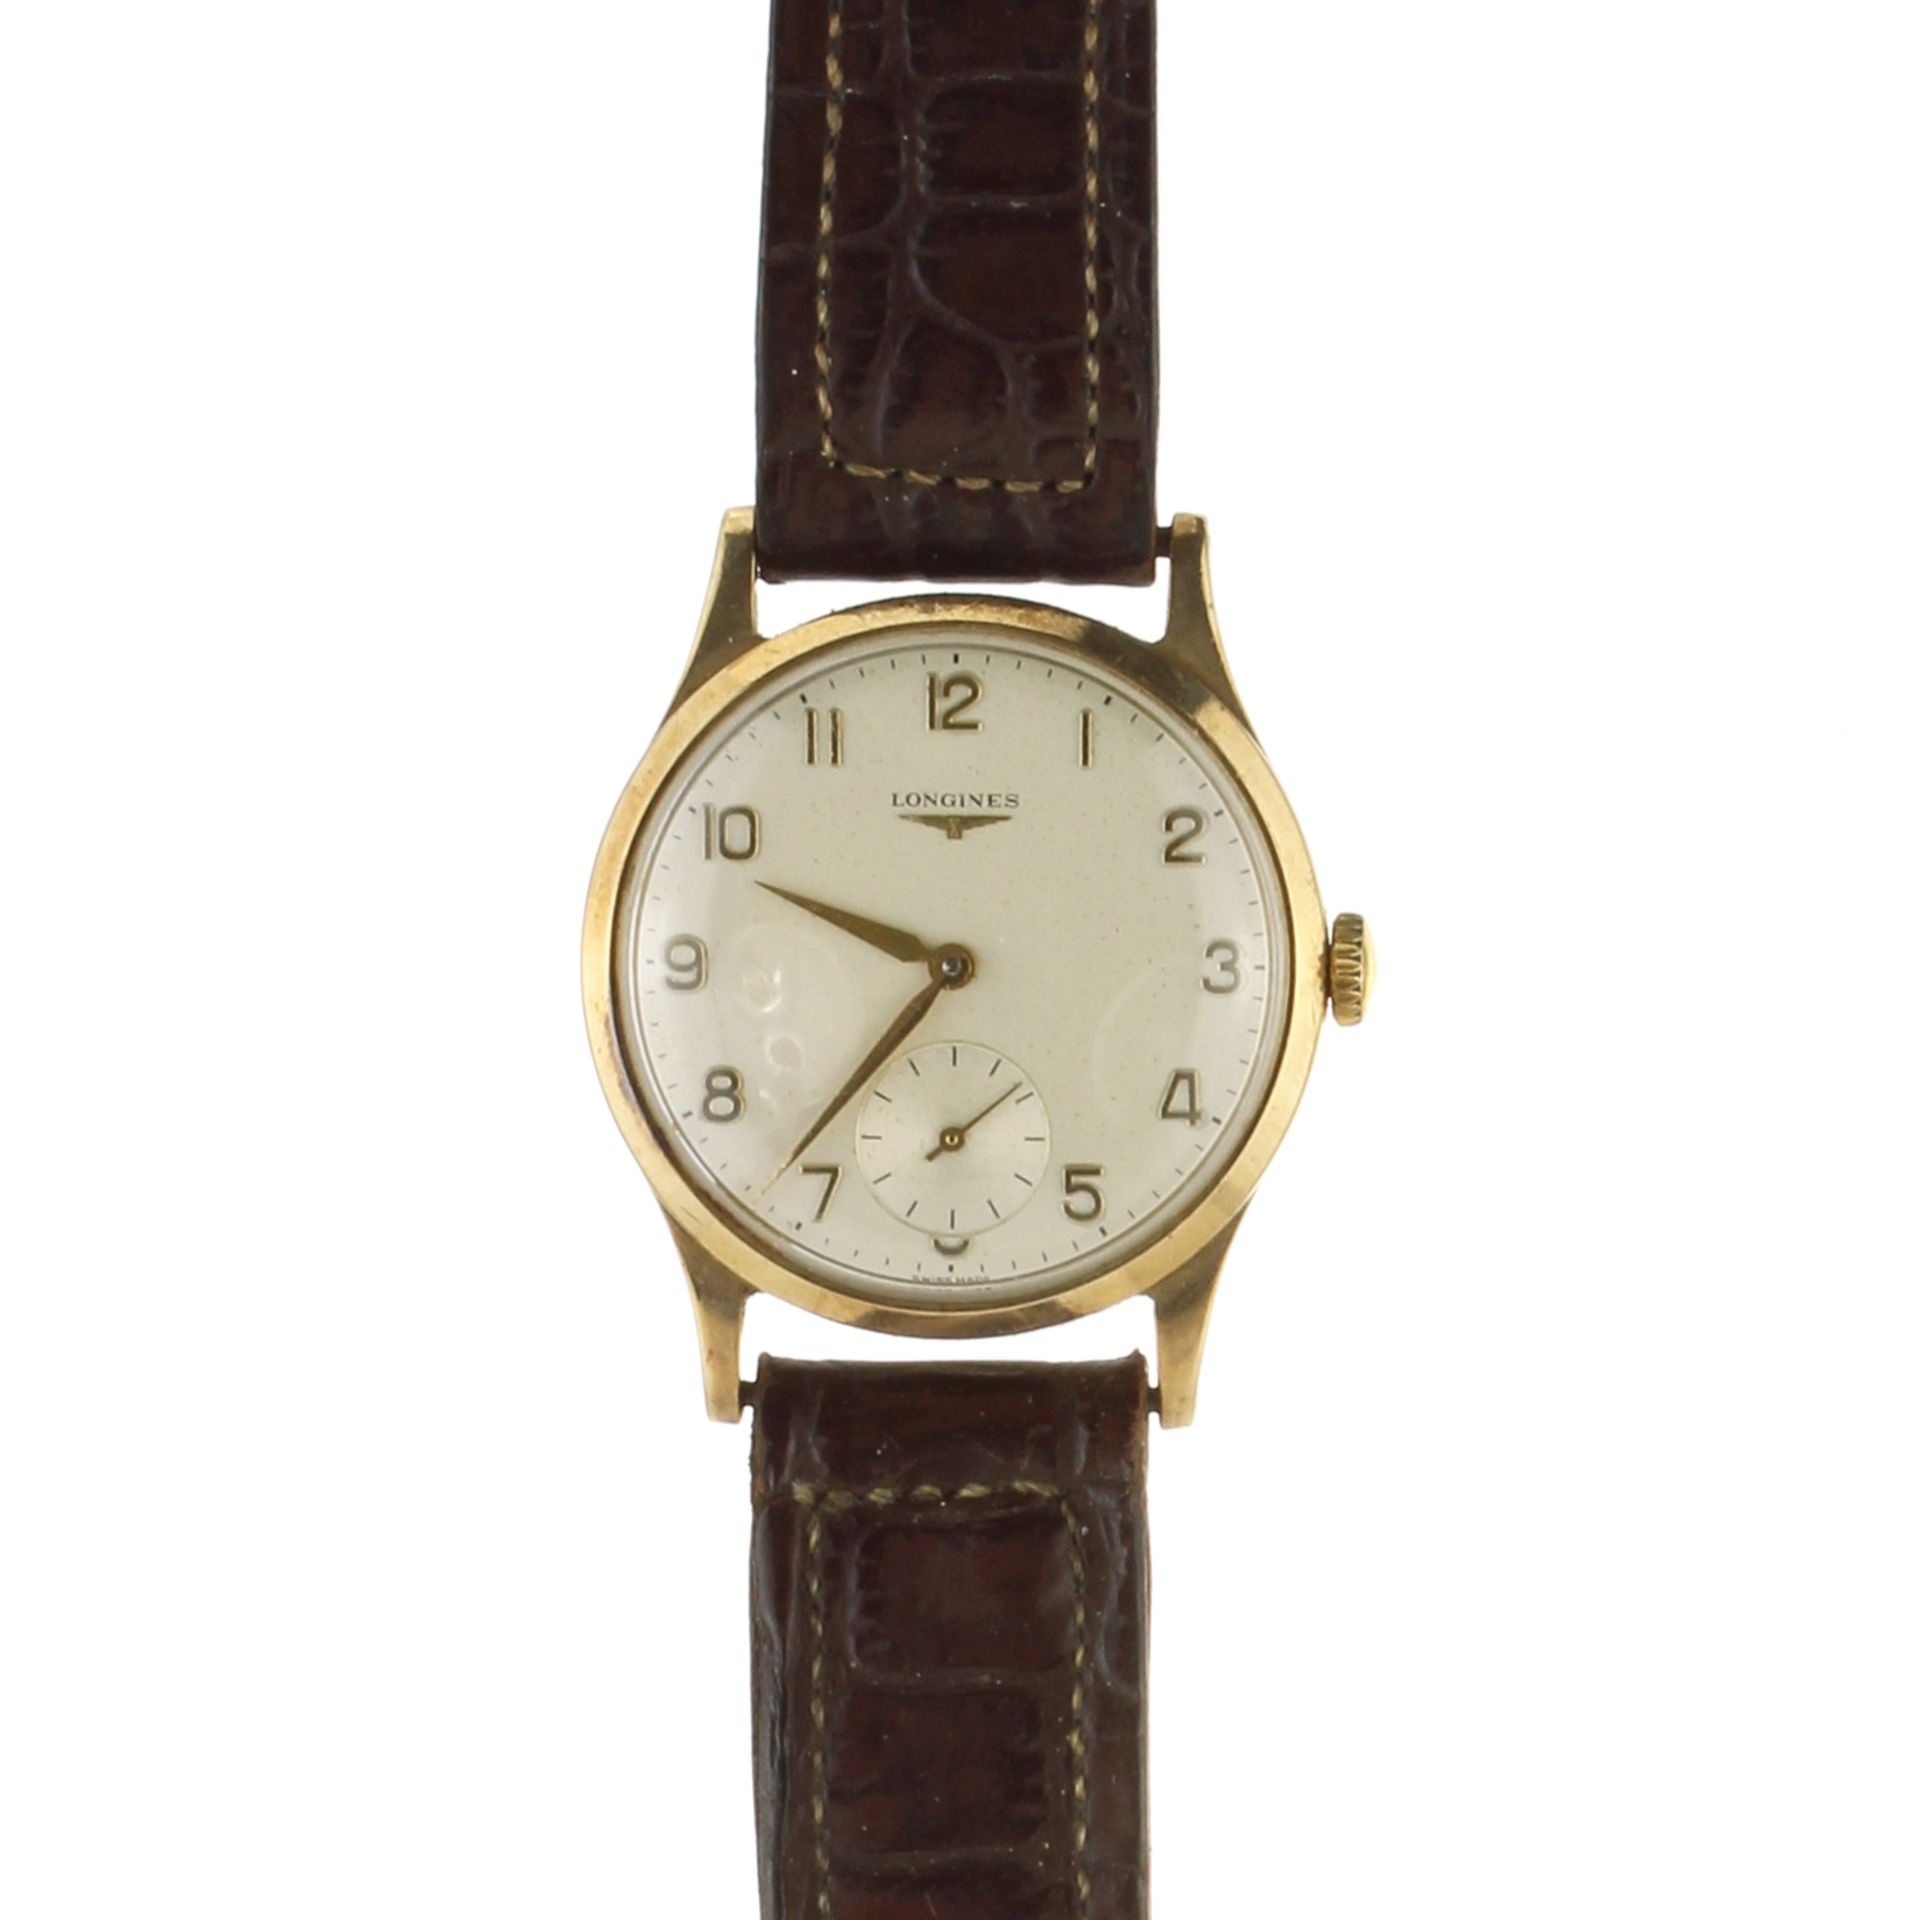 LONGINES A 9ct yellow gold wristwatch by Longines on a leather strap.